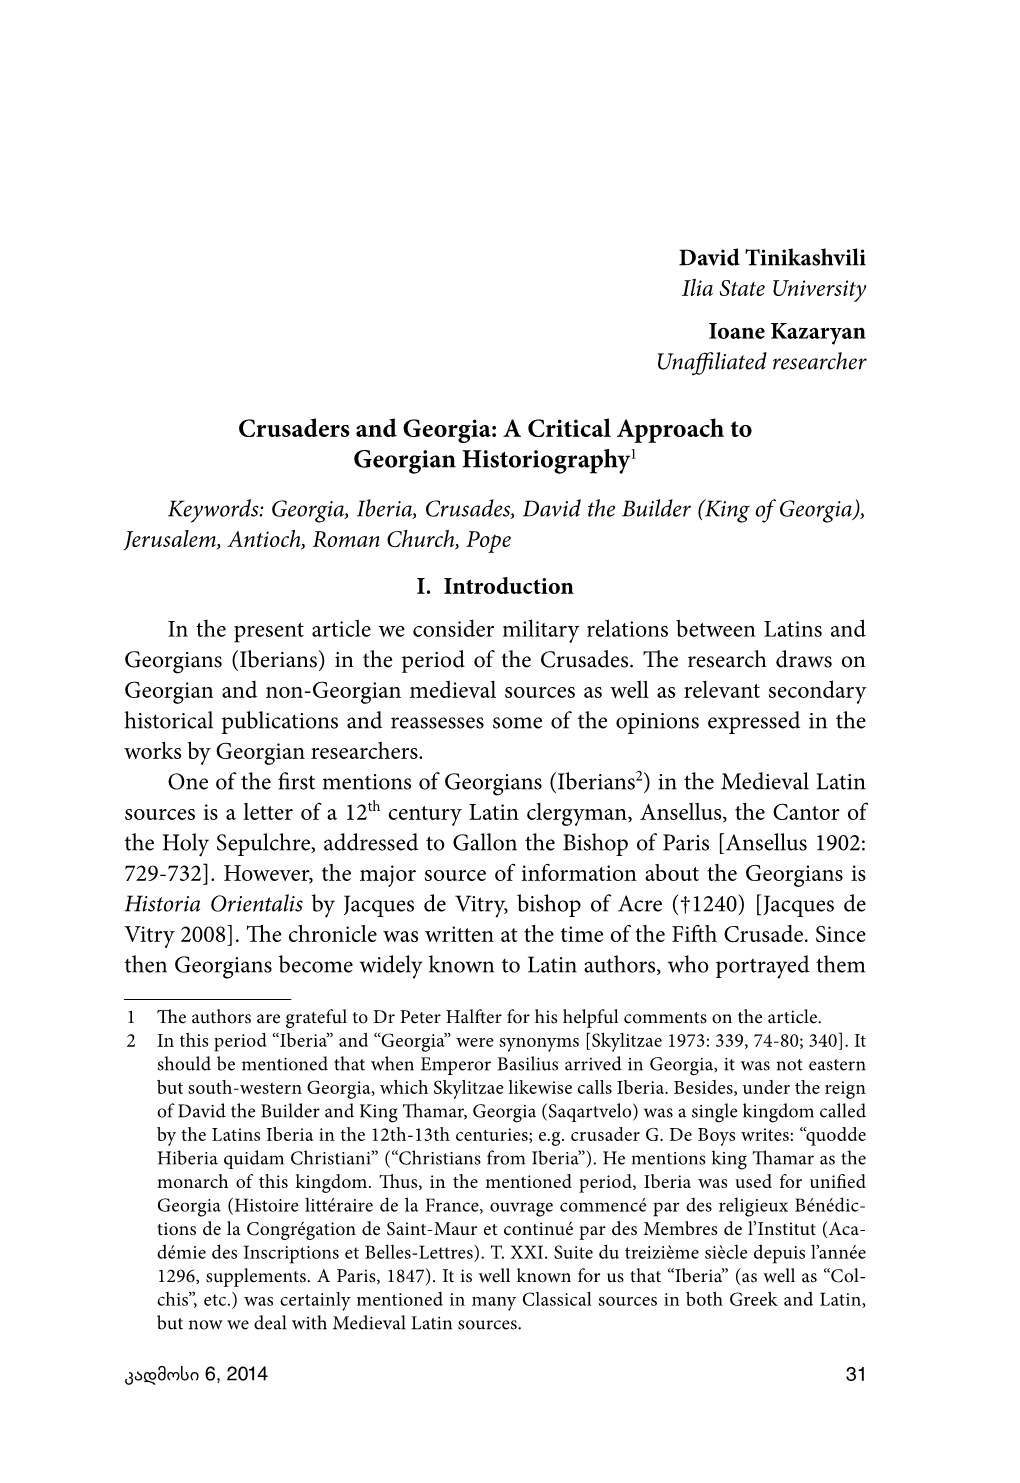 Crusaders and Georgia: a Critical Approach to Georgian Historiography1